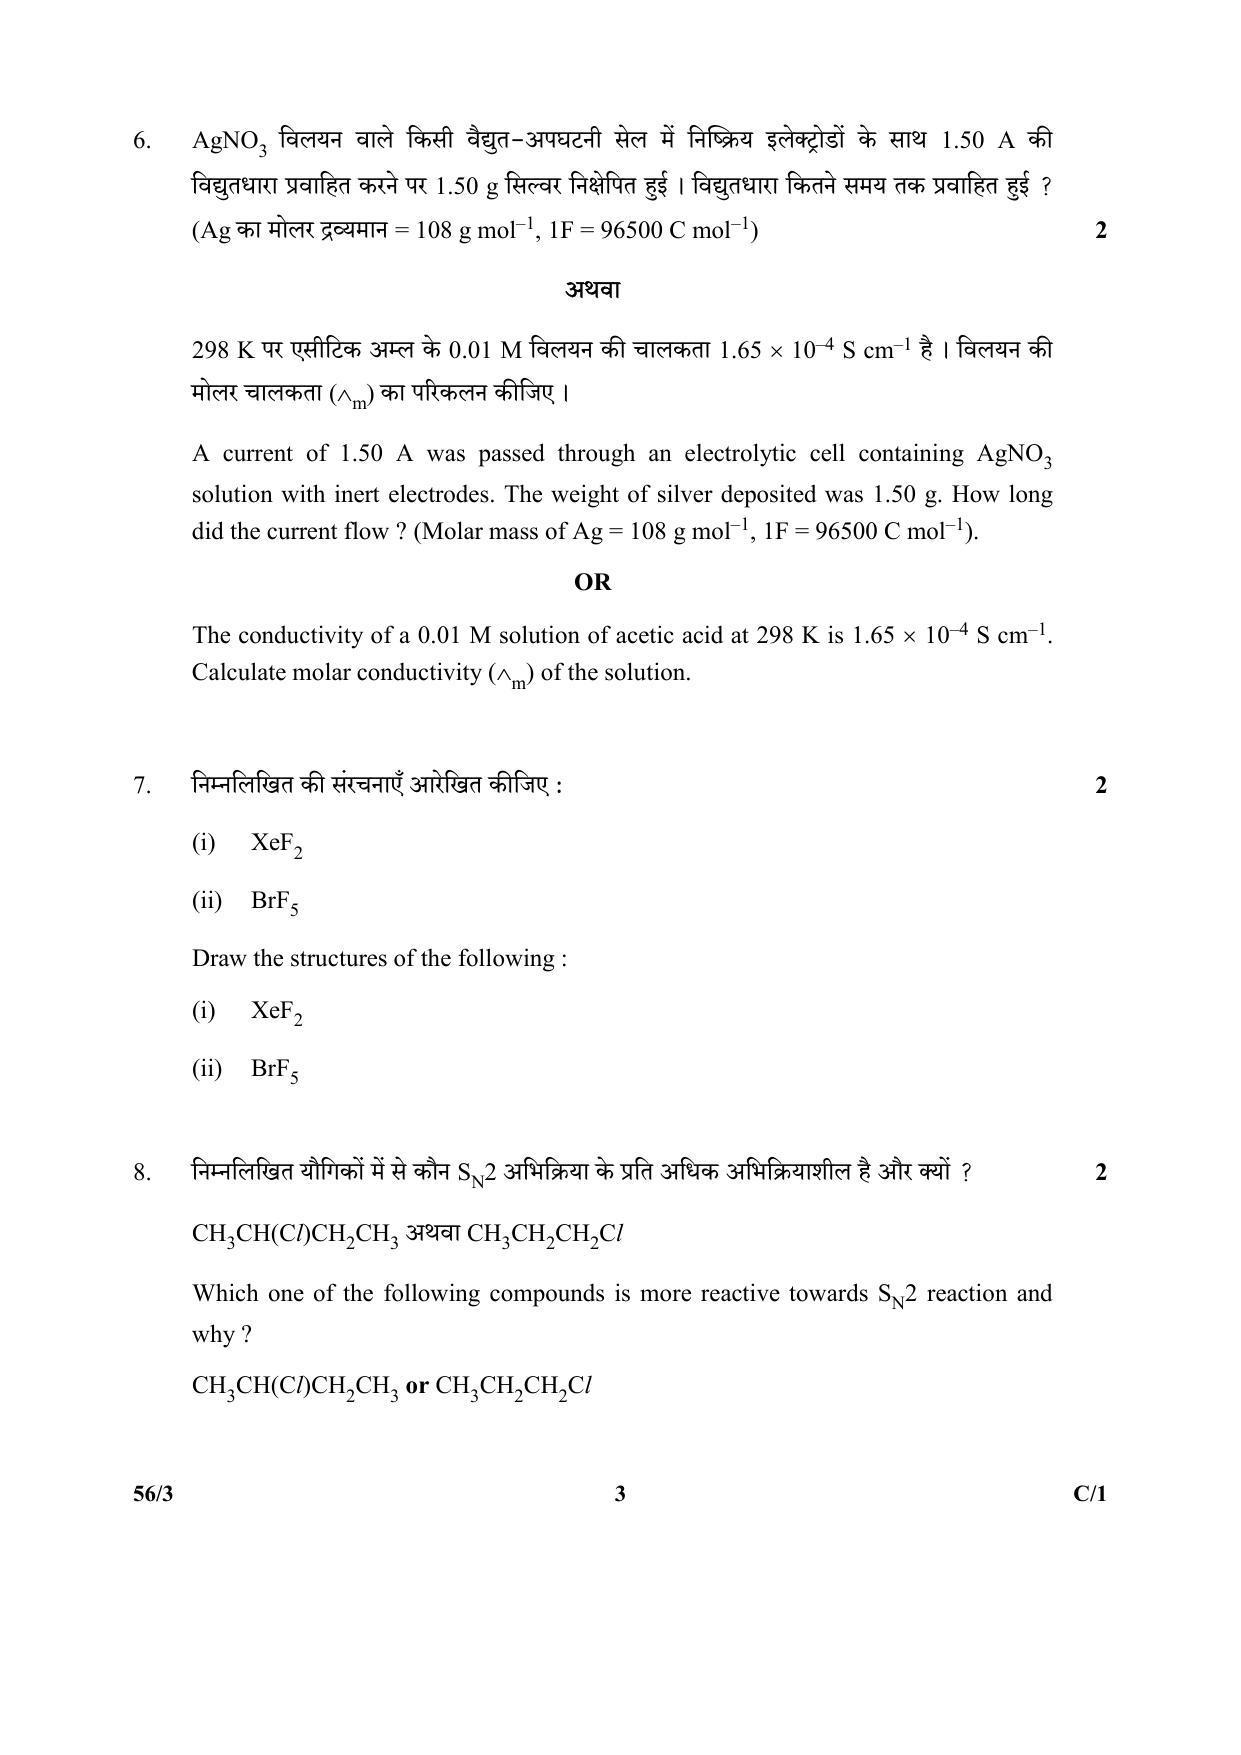 CBSE Class 12 56-3 (Chemistry) 2018 Compartment Question Paper - Page 3